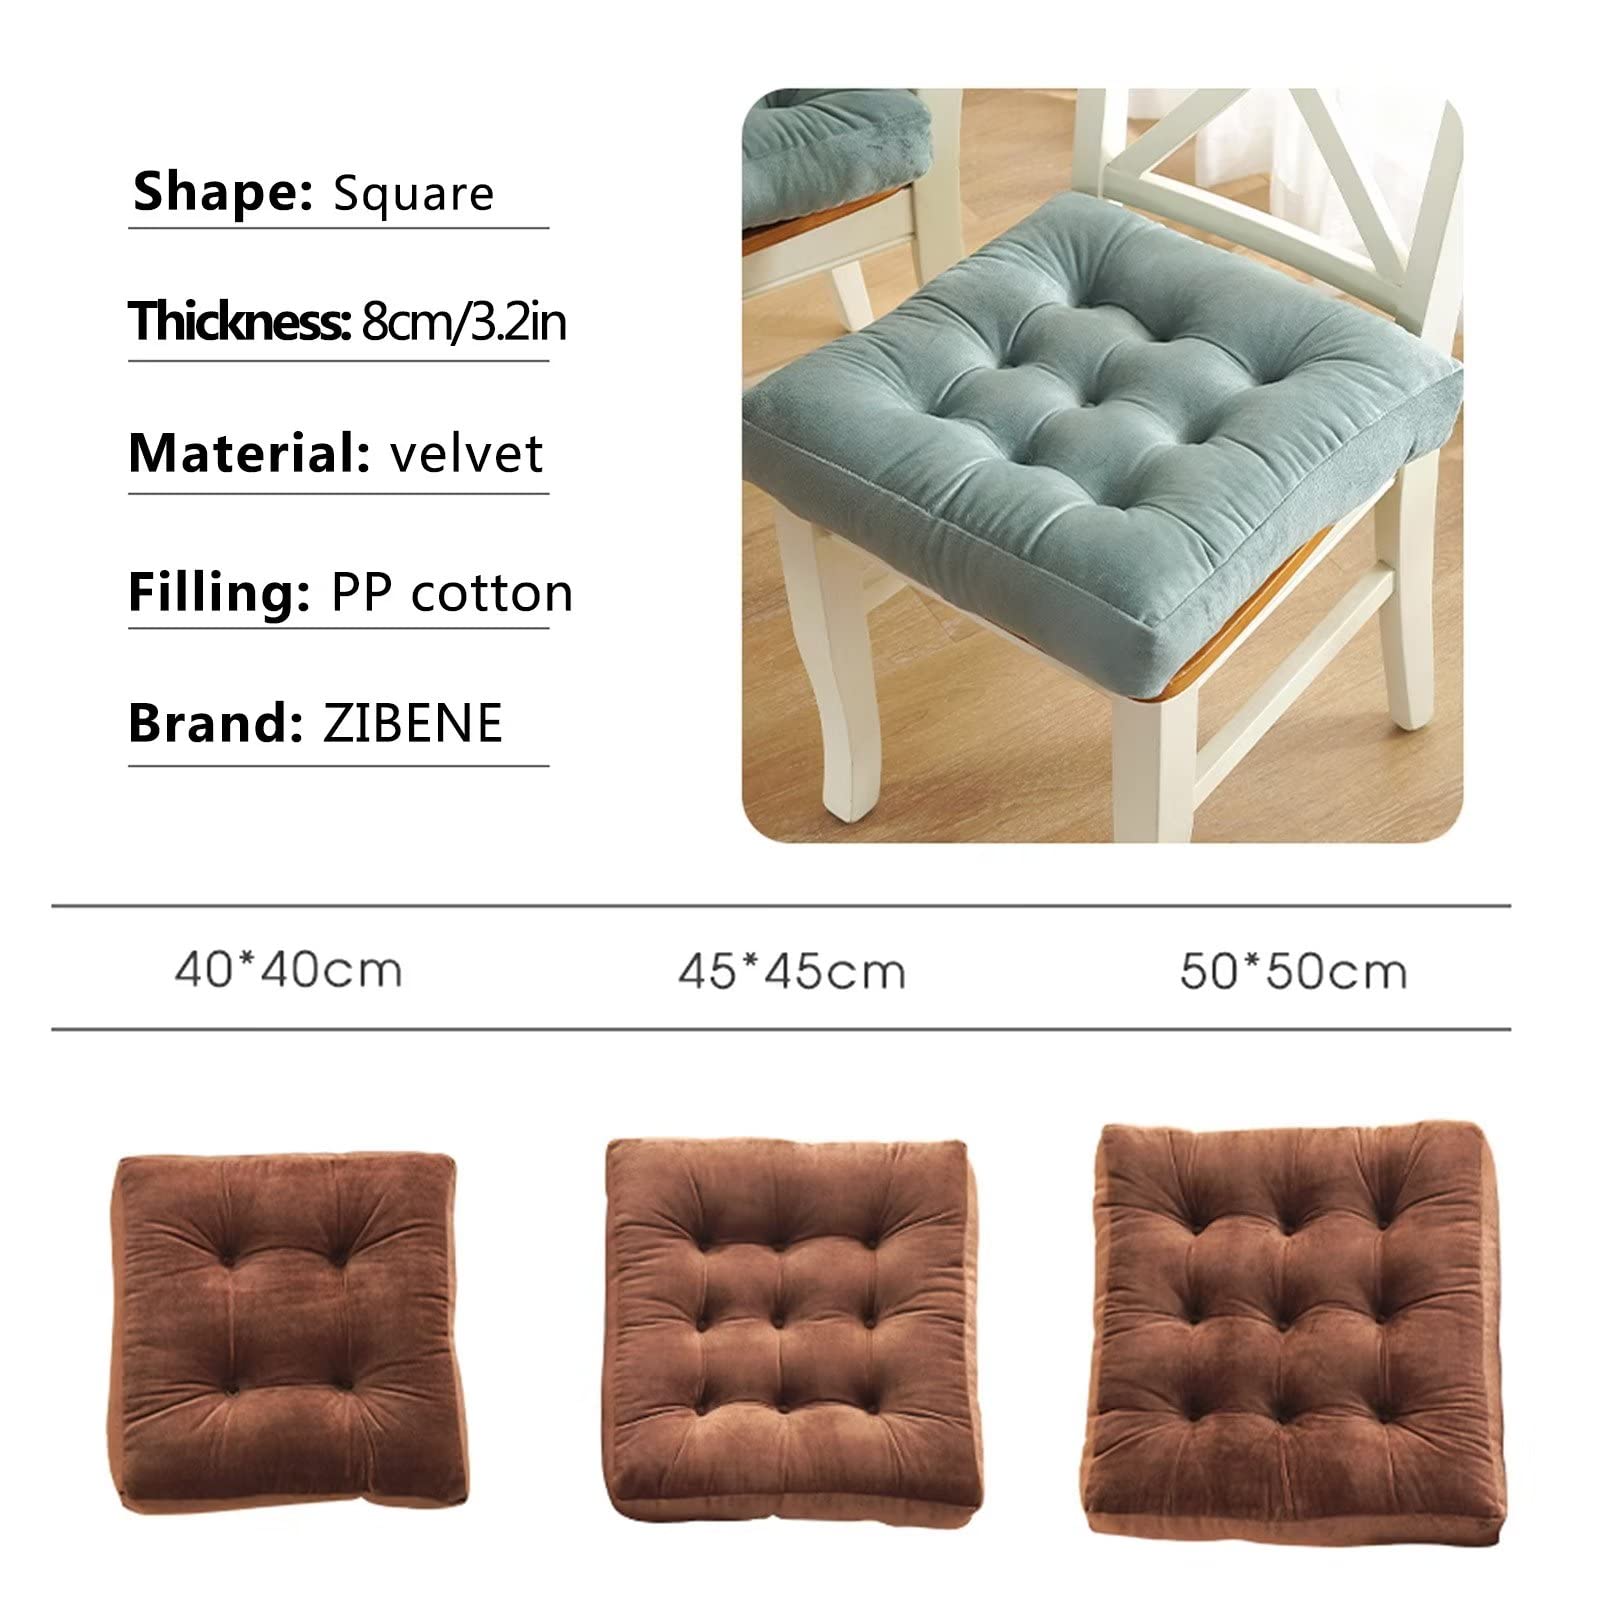 ZIBENE Outdoor Chair Seat Cushions 20x20, Thick Square Seat Cushions, Bar Chair Cushions Square Anti-Deformation 8cm, Warm and Soft Velvet Kitchen Chair Pads, Washable, No Fading, White